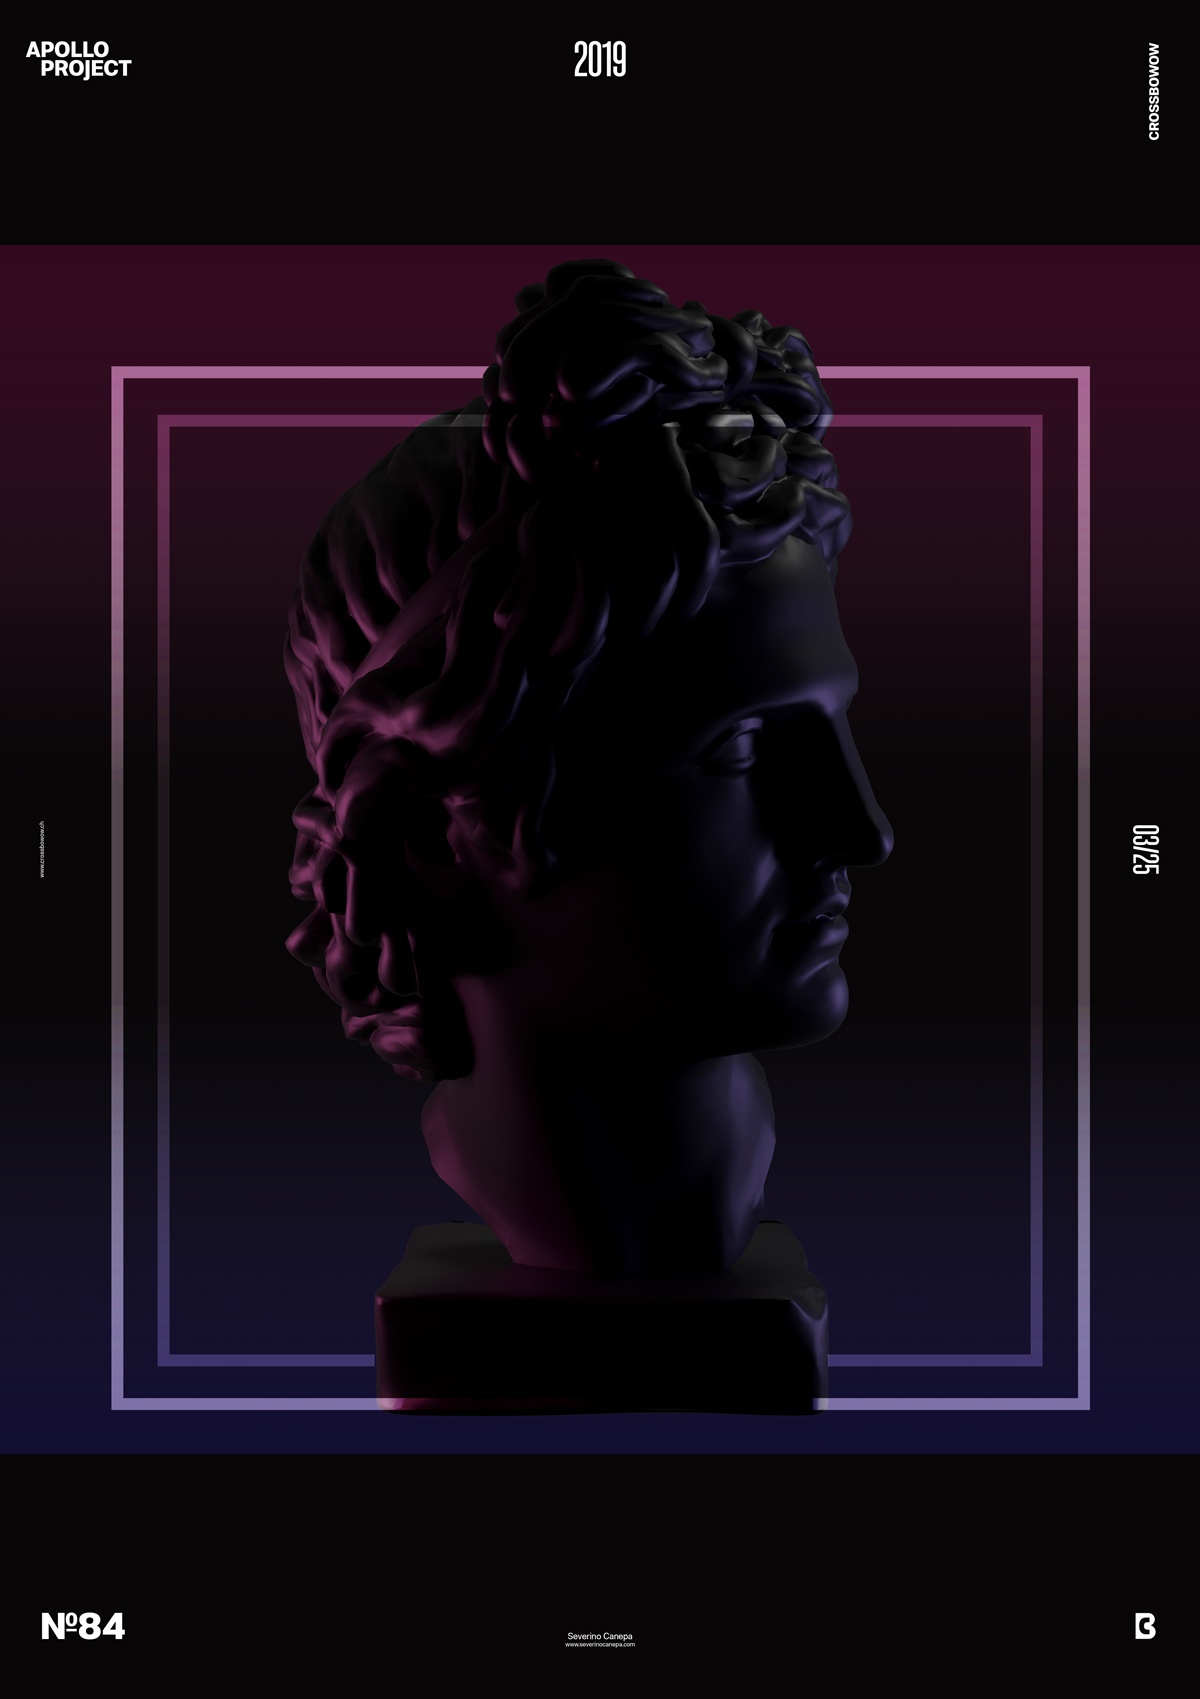 Second 3D poster design titled In Black with Apollo's Head